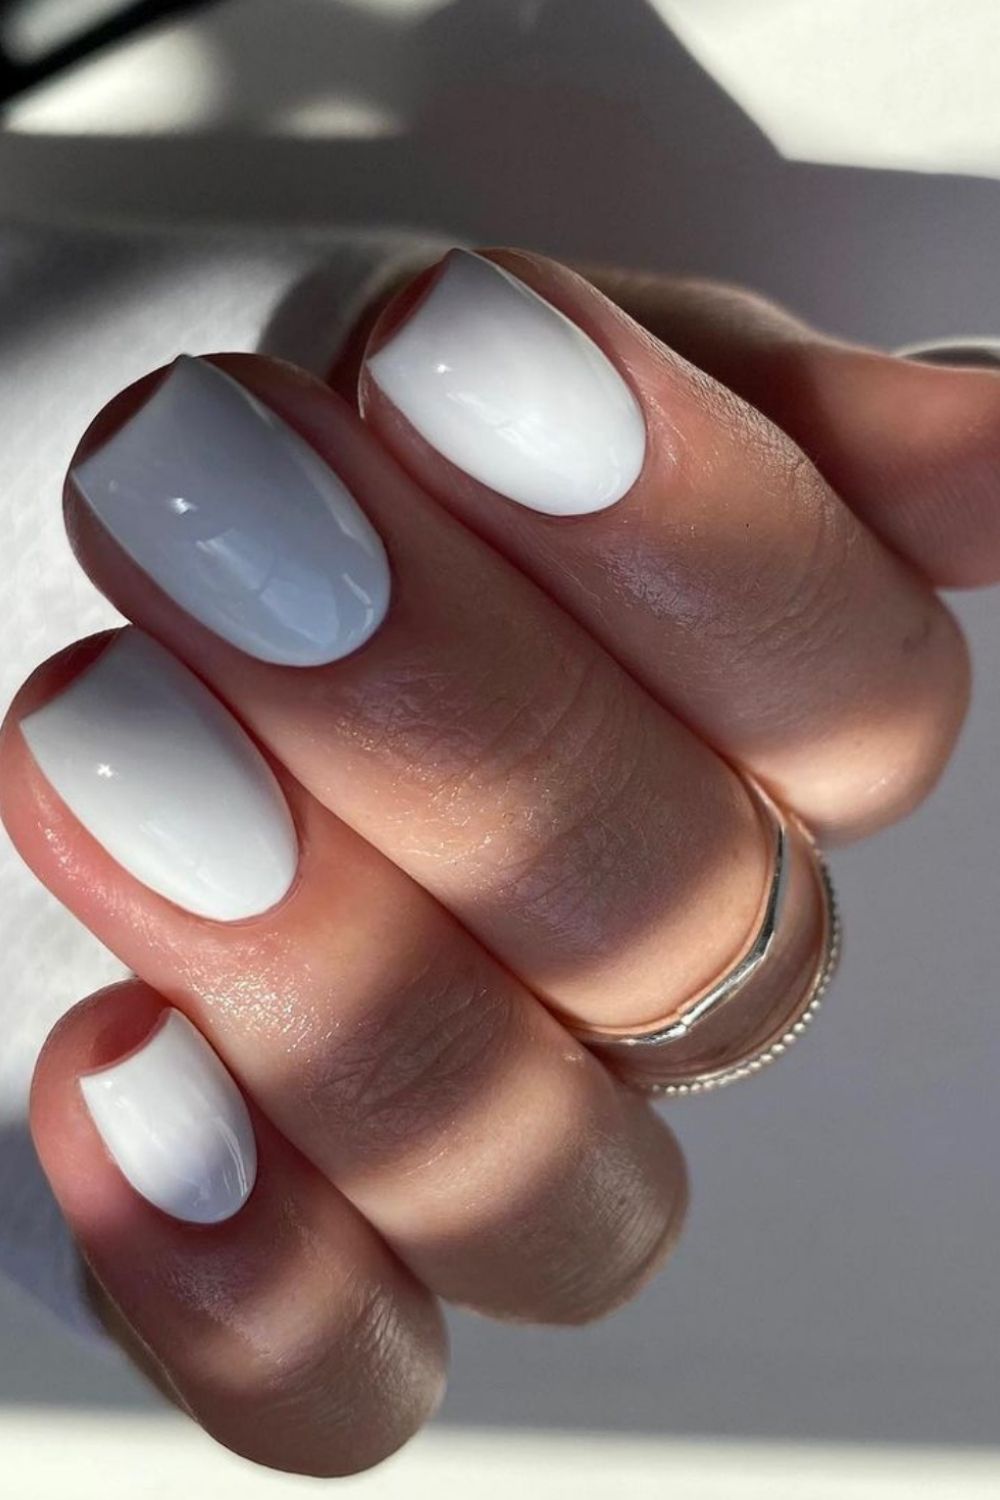 Square Nails. 2 75+ Hottest Looking Nail Shapes for Women - 35